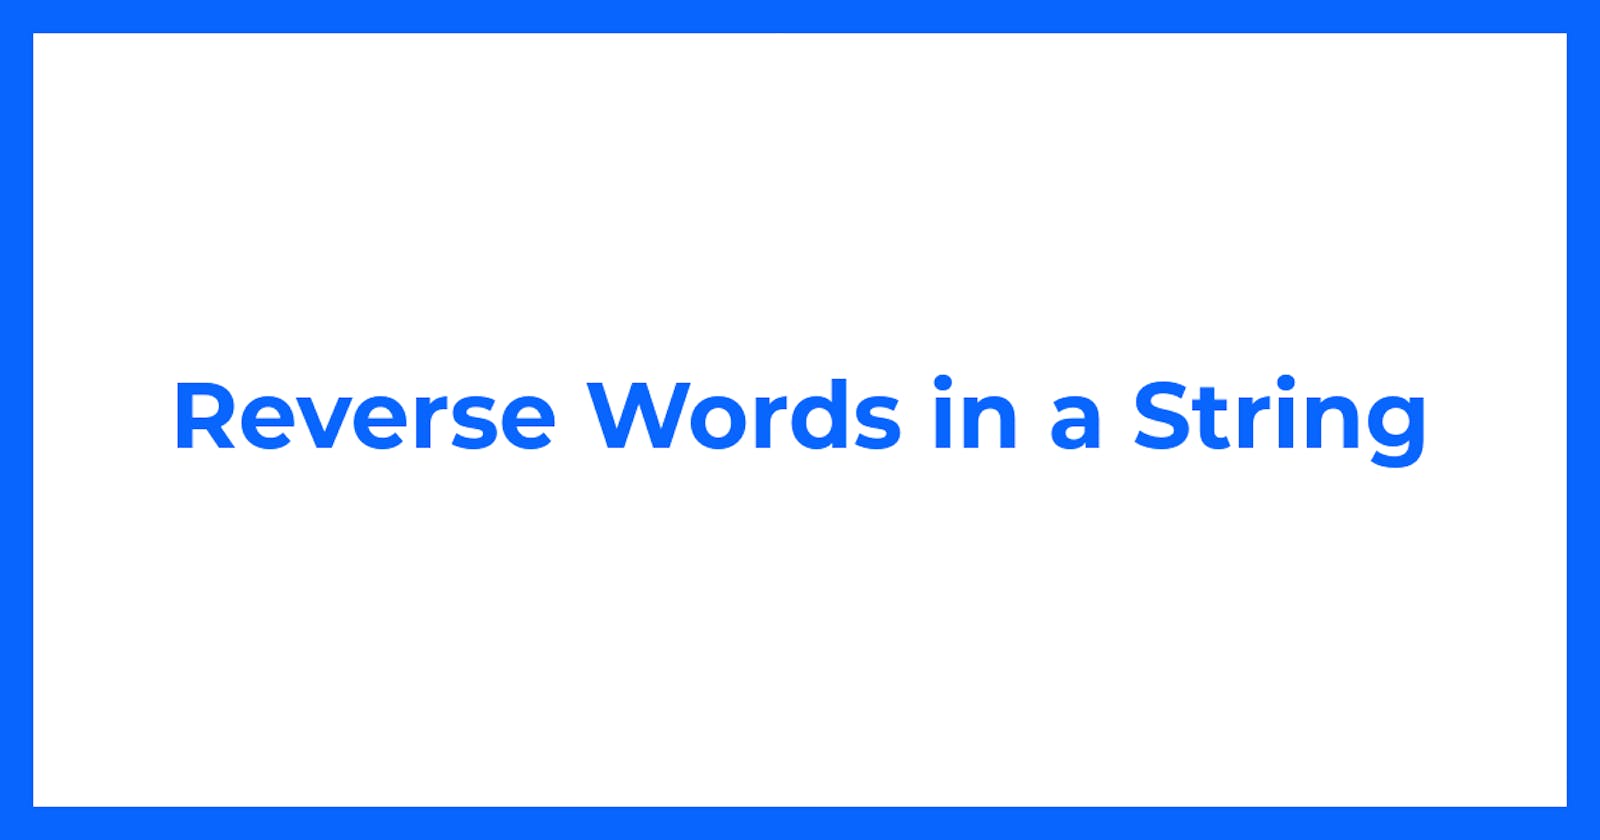 Reverse Words in a String